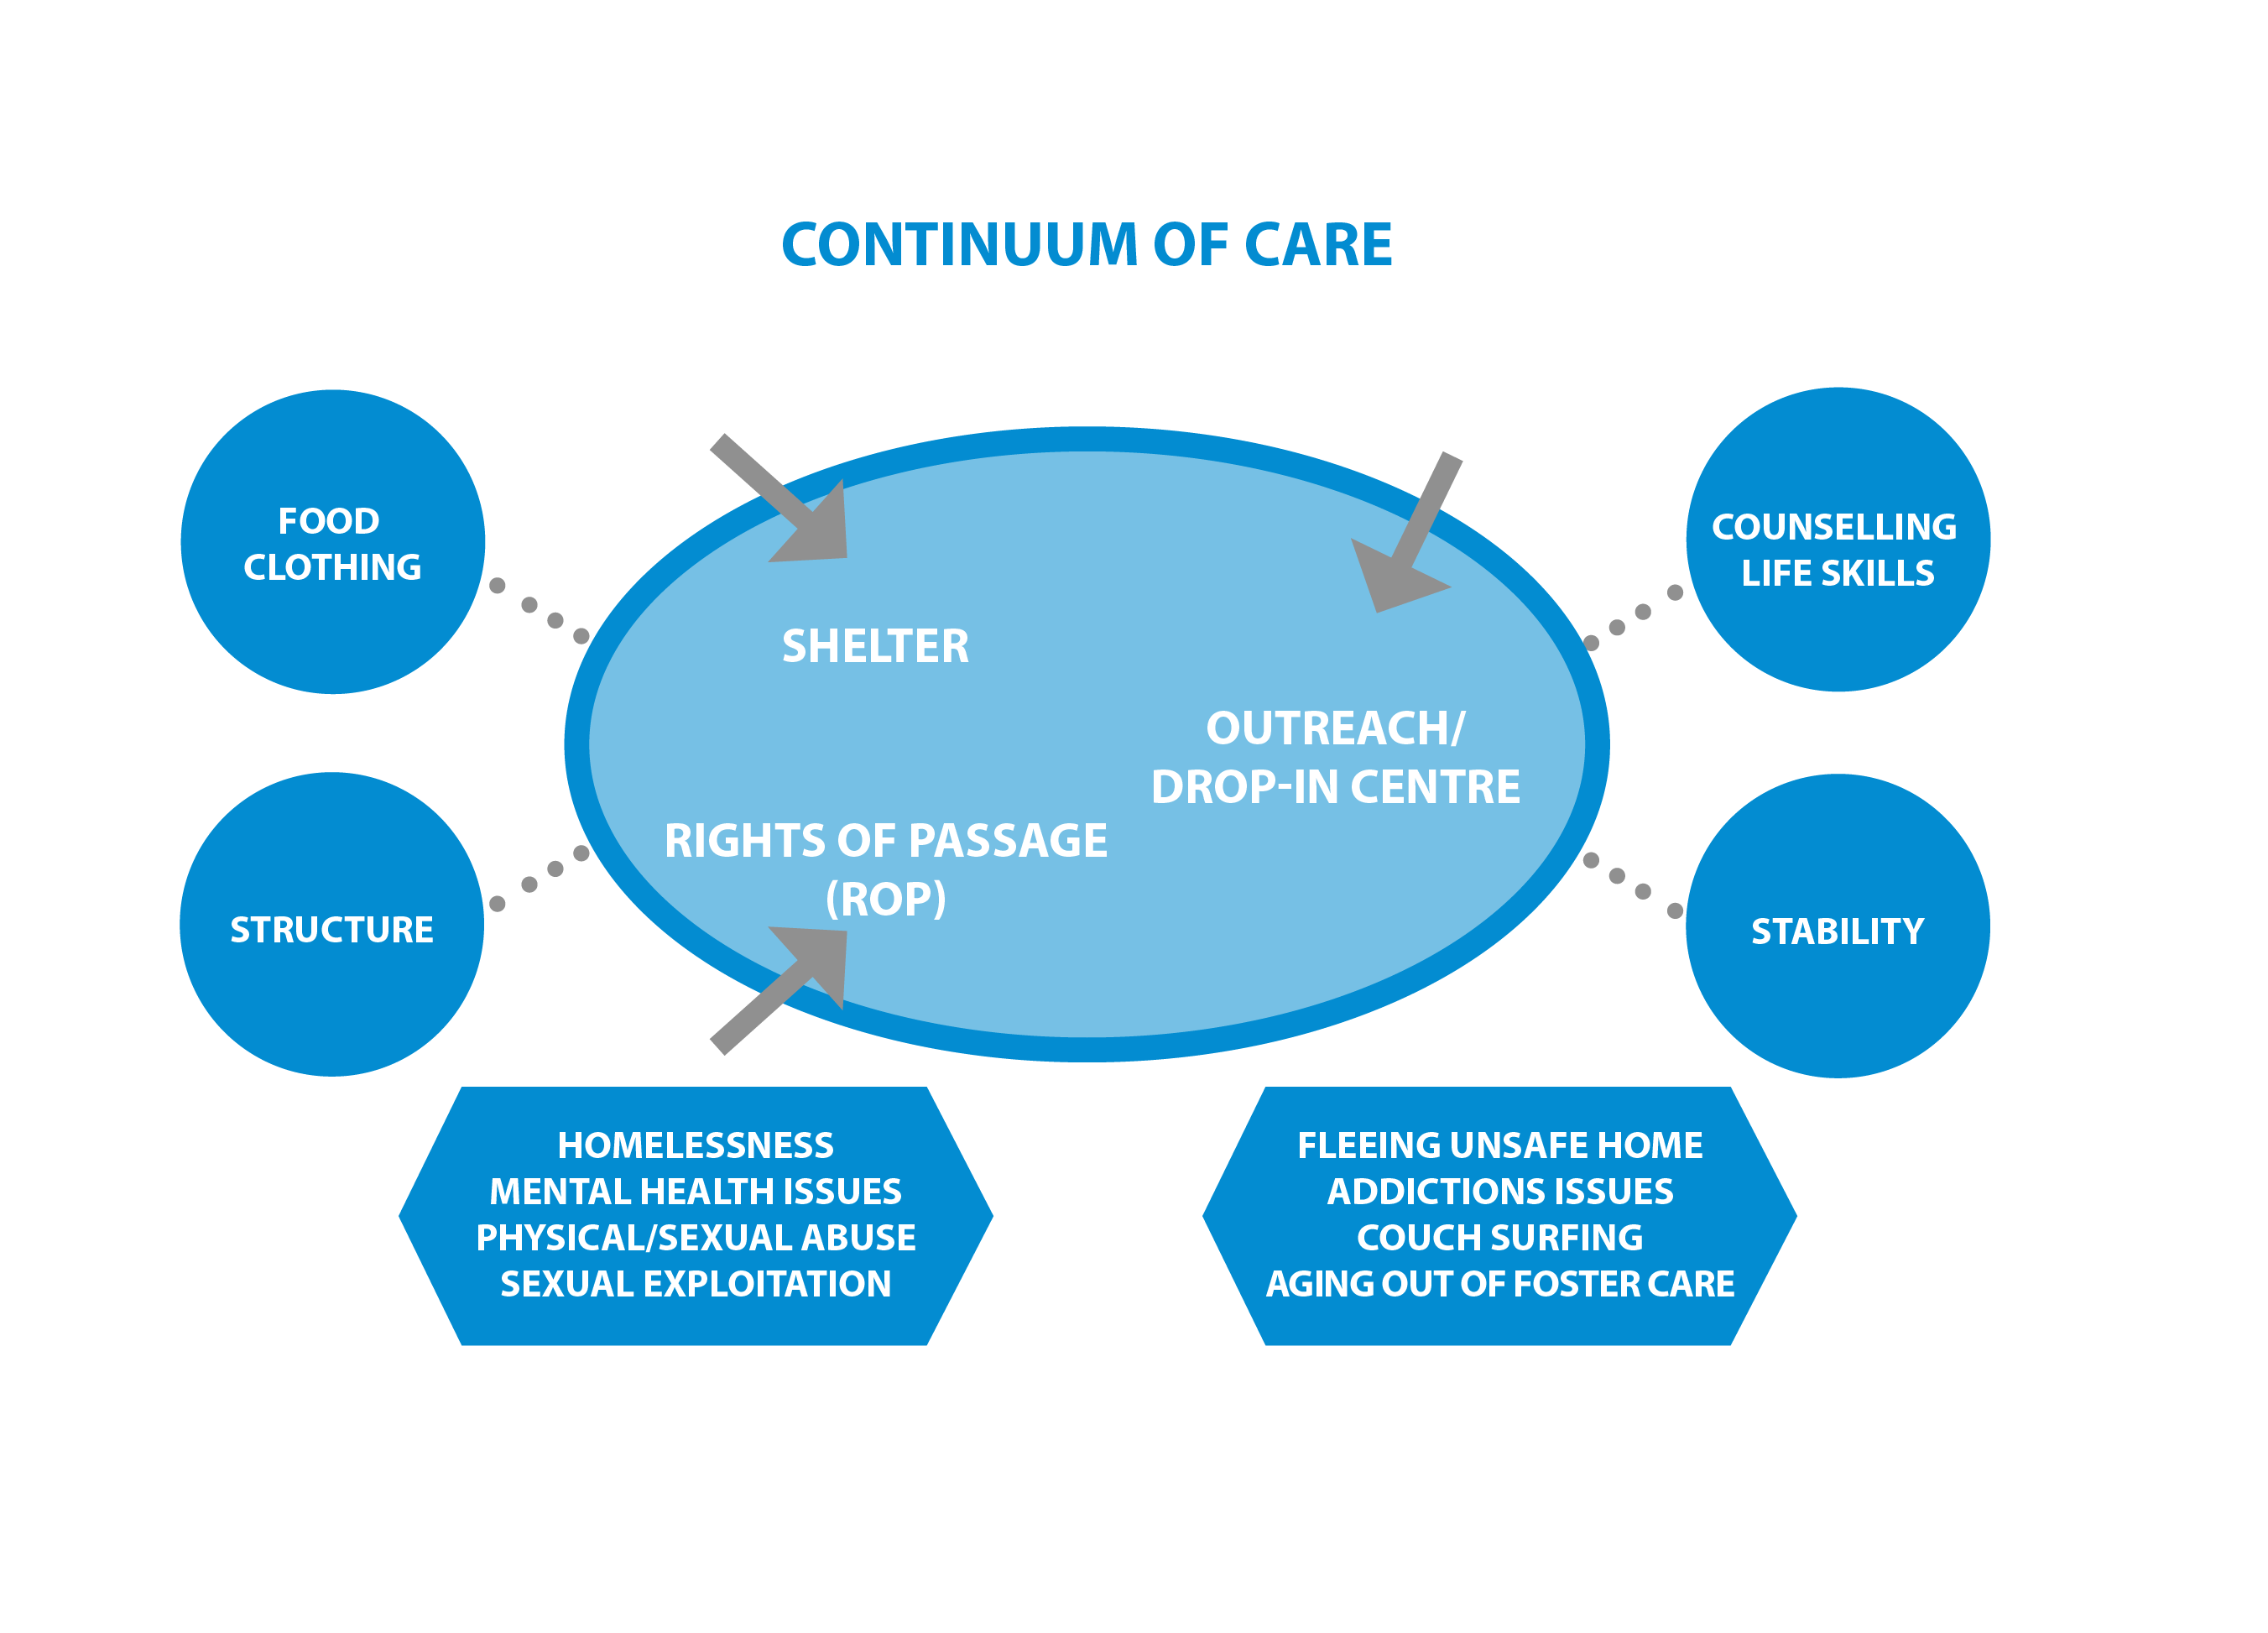 Continuum of Care at Covenant House